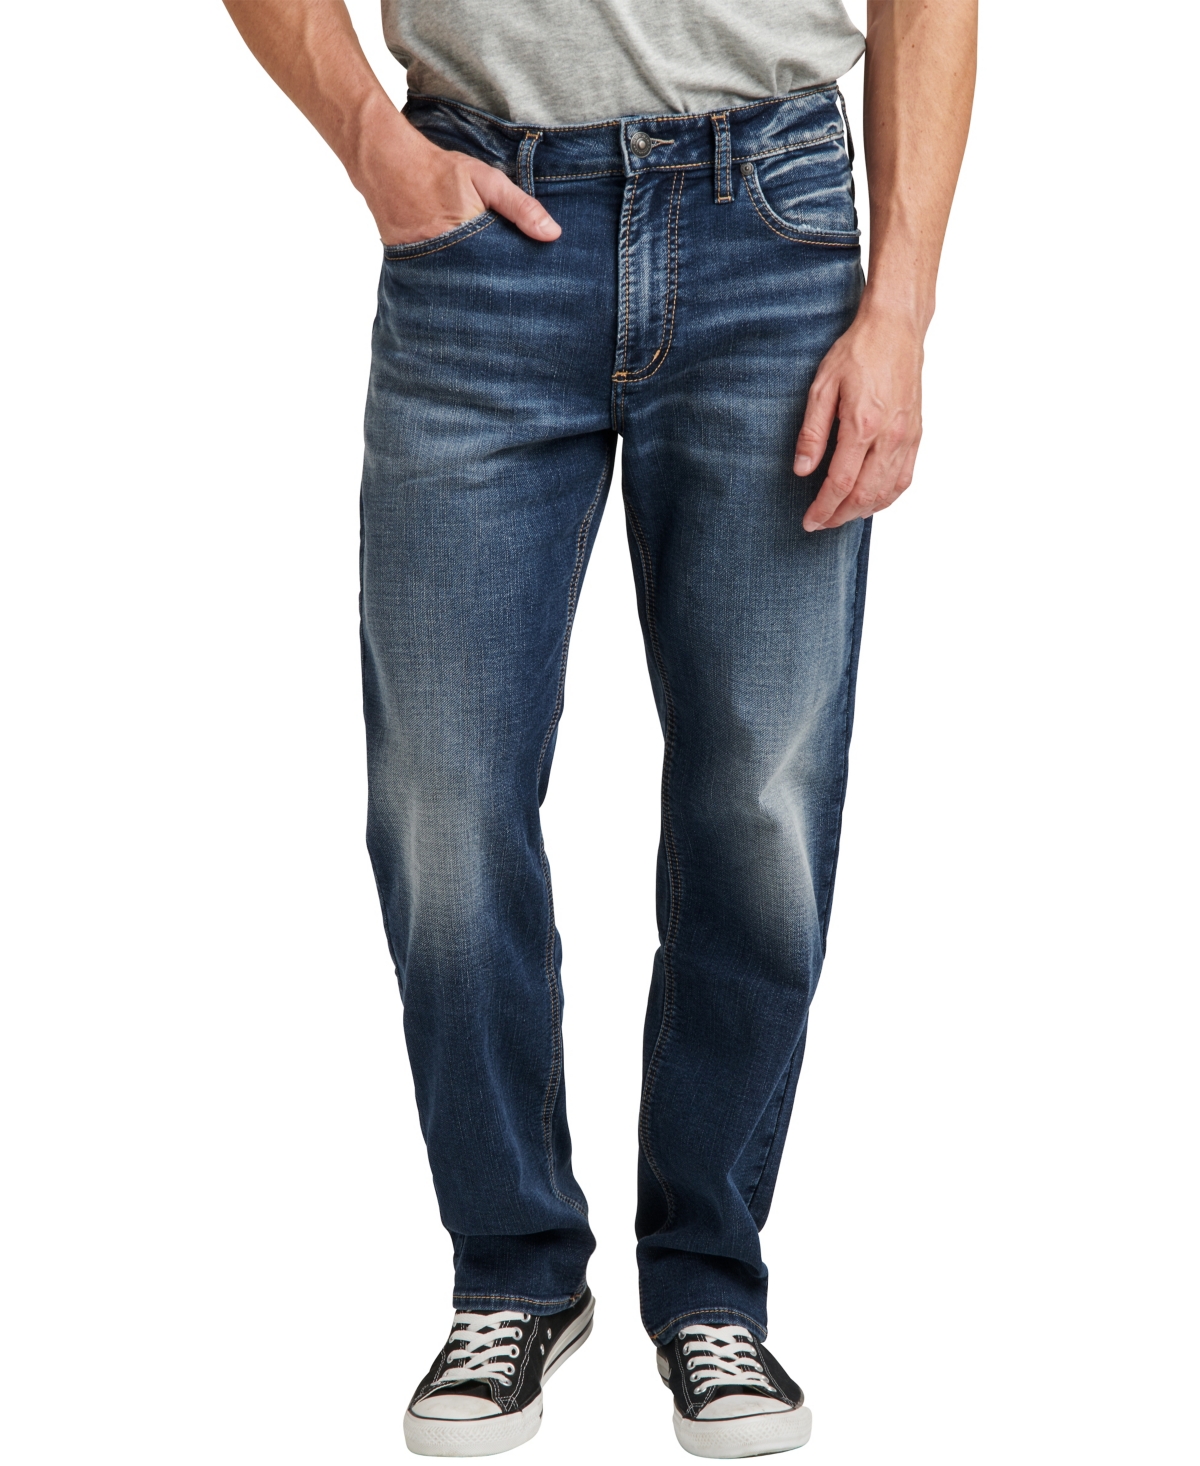 SILVER JEANS CO. MEN'S HUNTER ATHLETIC FIT TAPERED LEG JEANS